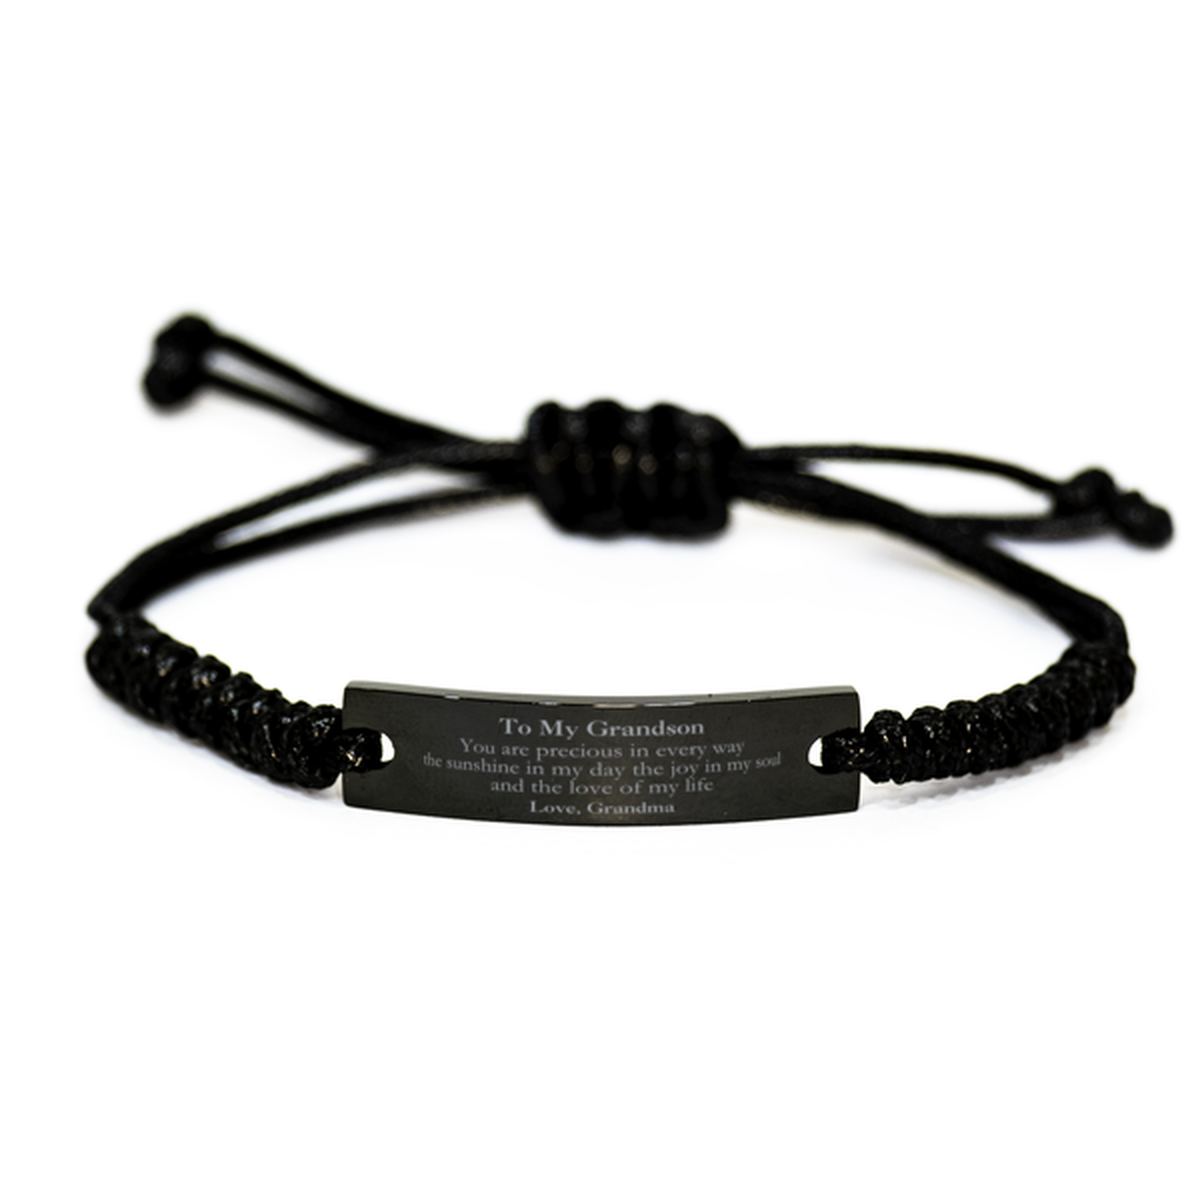 Graduation Gifts for Grandson Black Rope Bracelet Present from Grandma, Christmas Grandson Birthday Gifts Grandson You are precious in every way the sunshine in my day. Love, Grandma